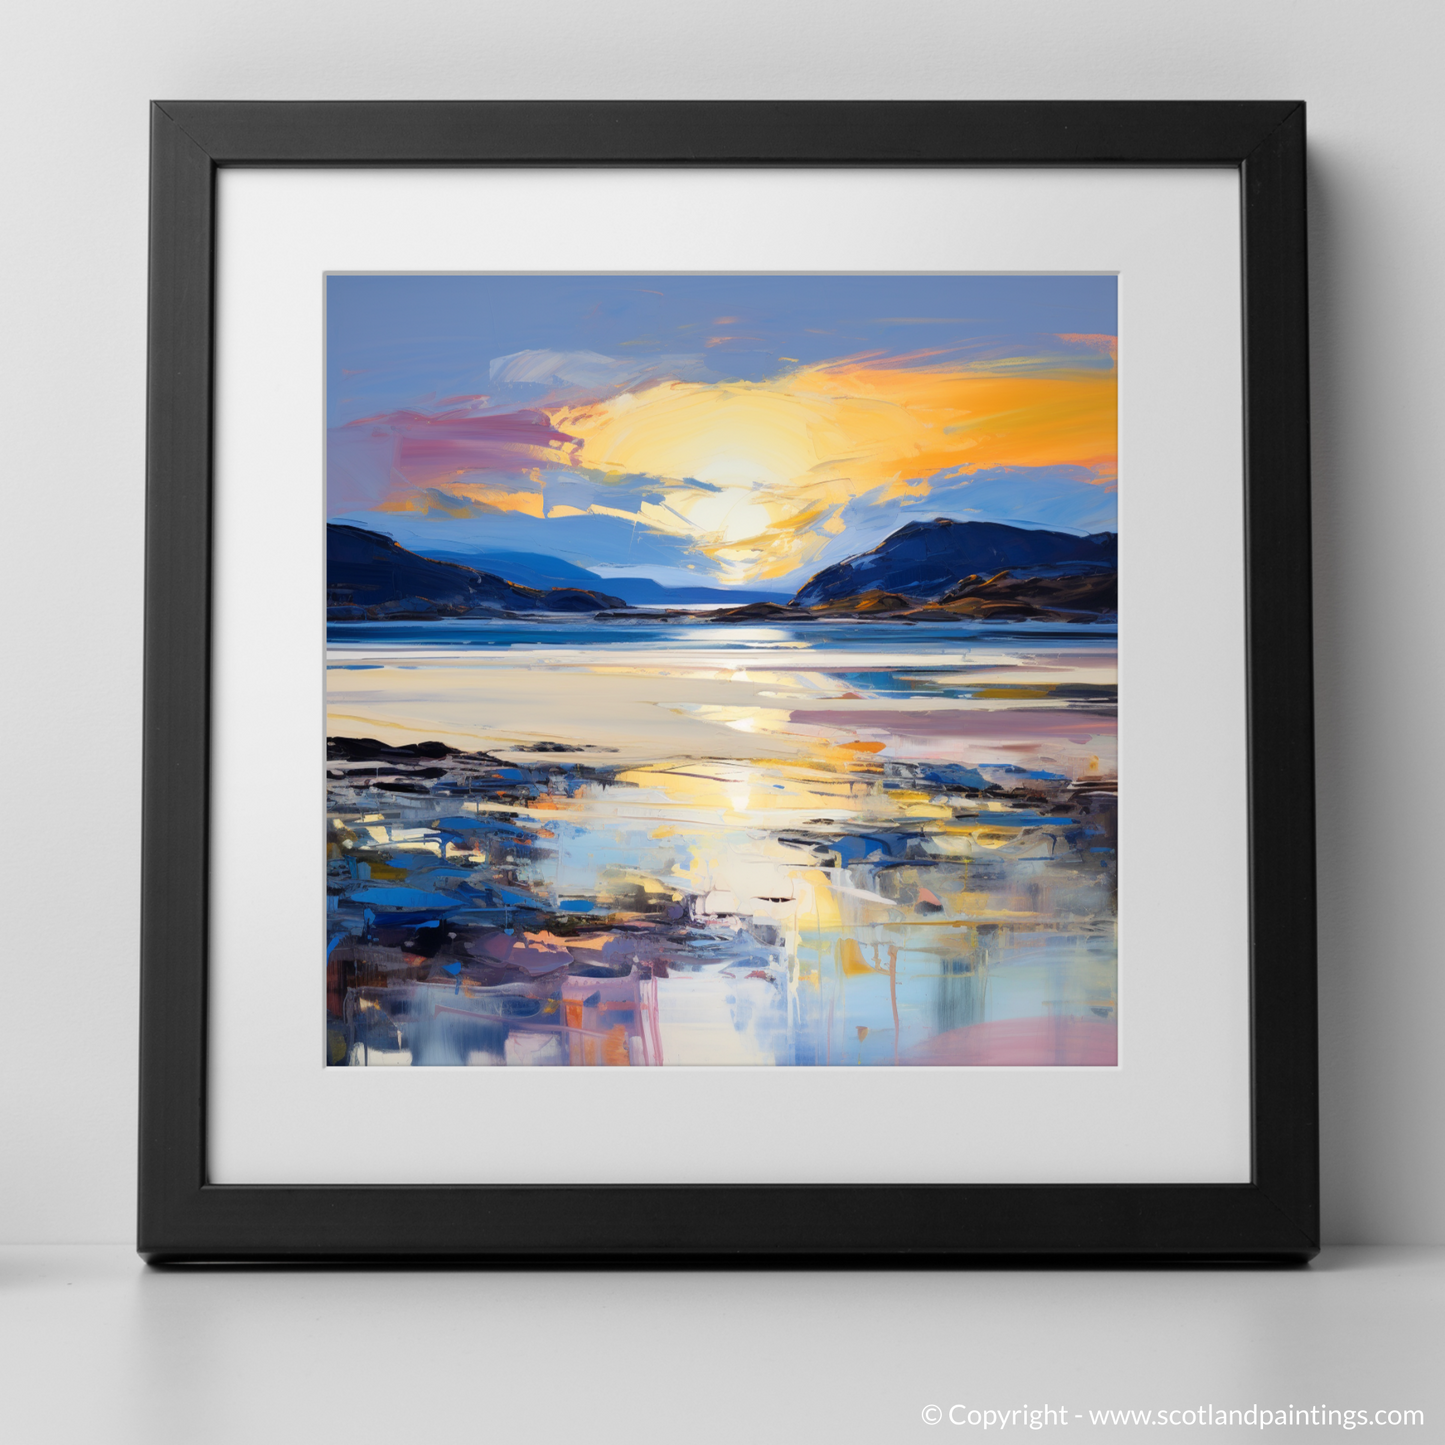 Art Print of Traigh Mhor at dusk with a black frame